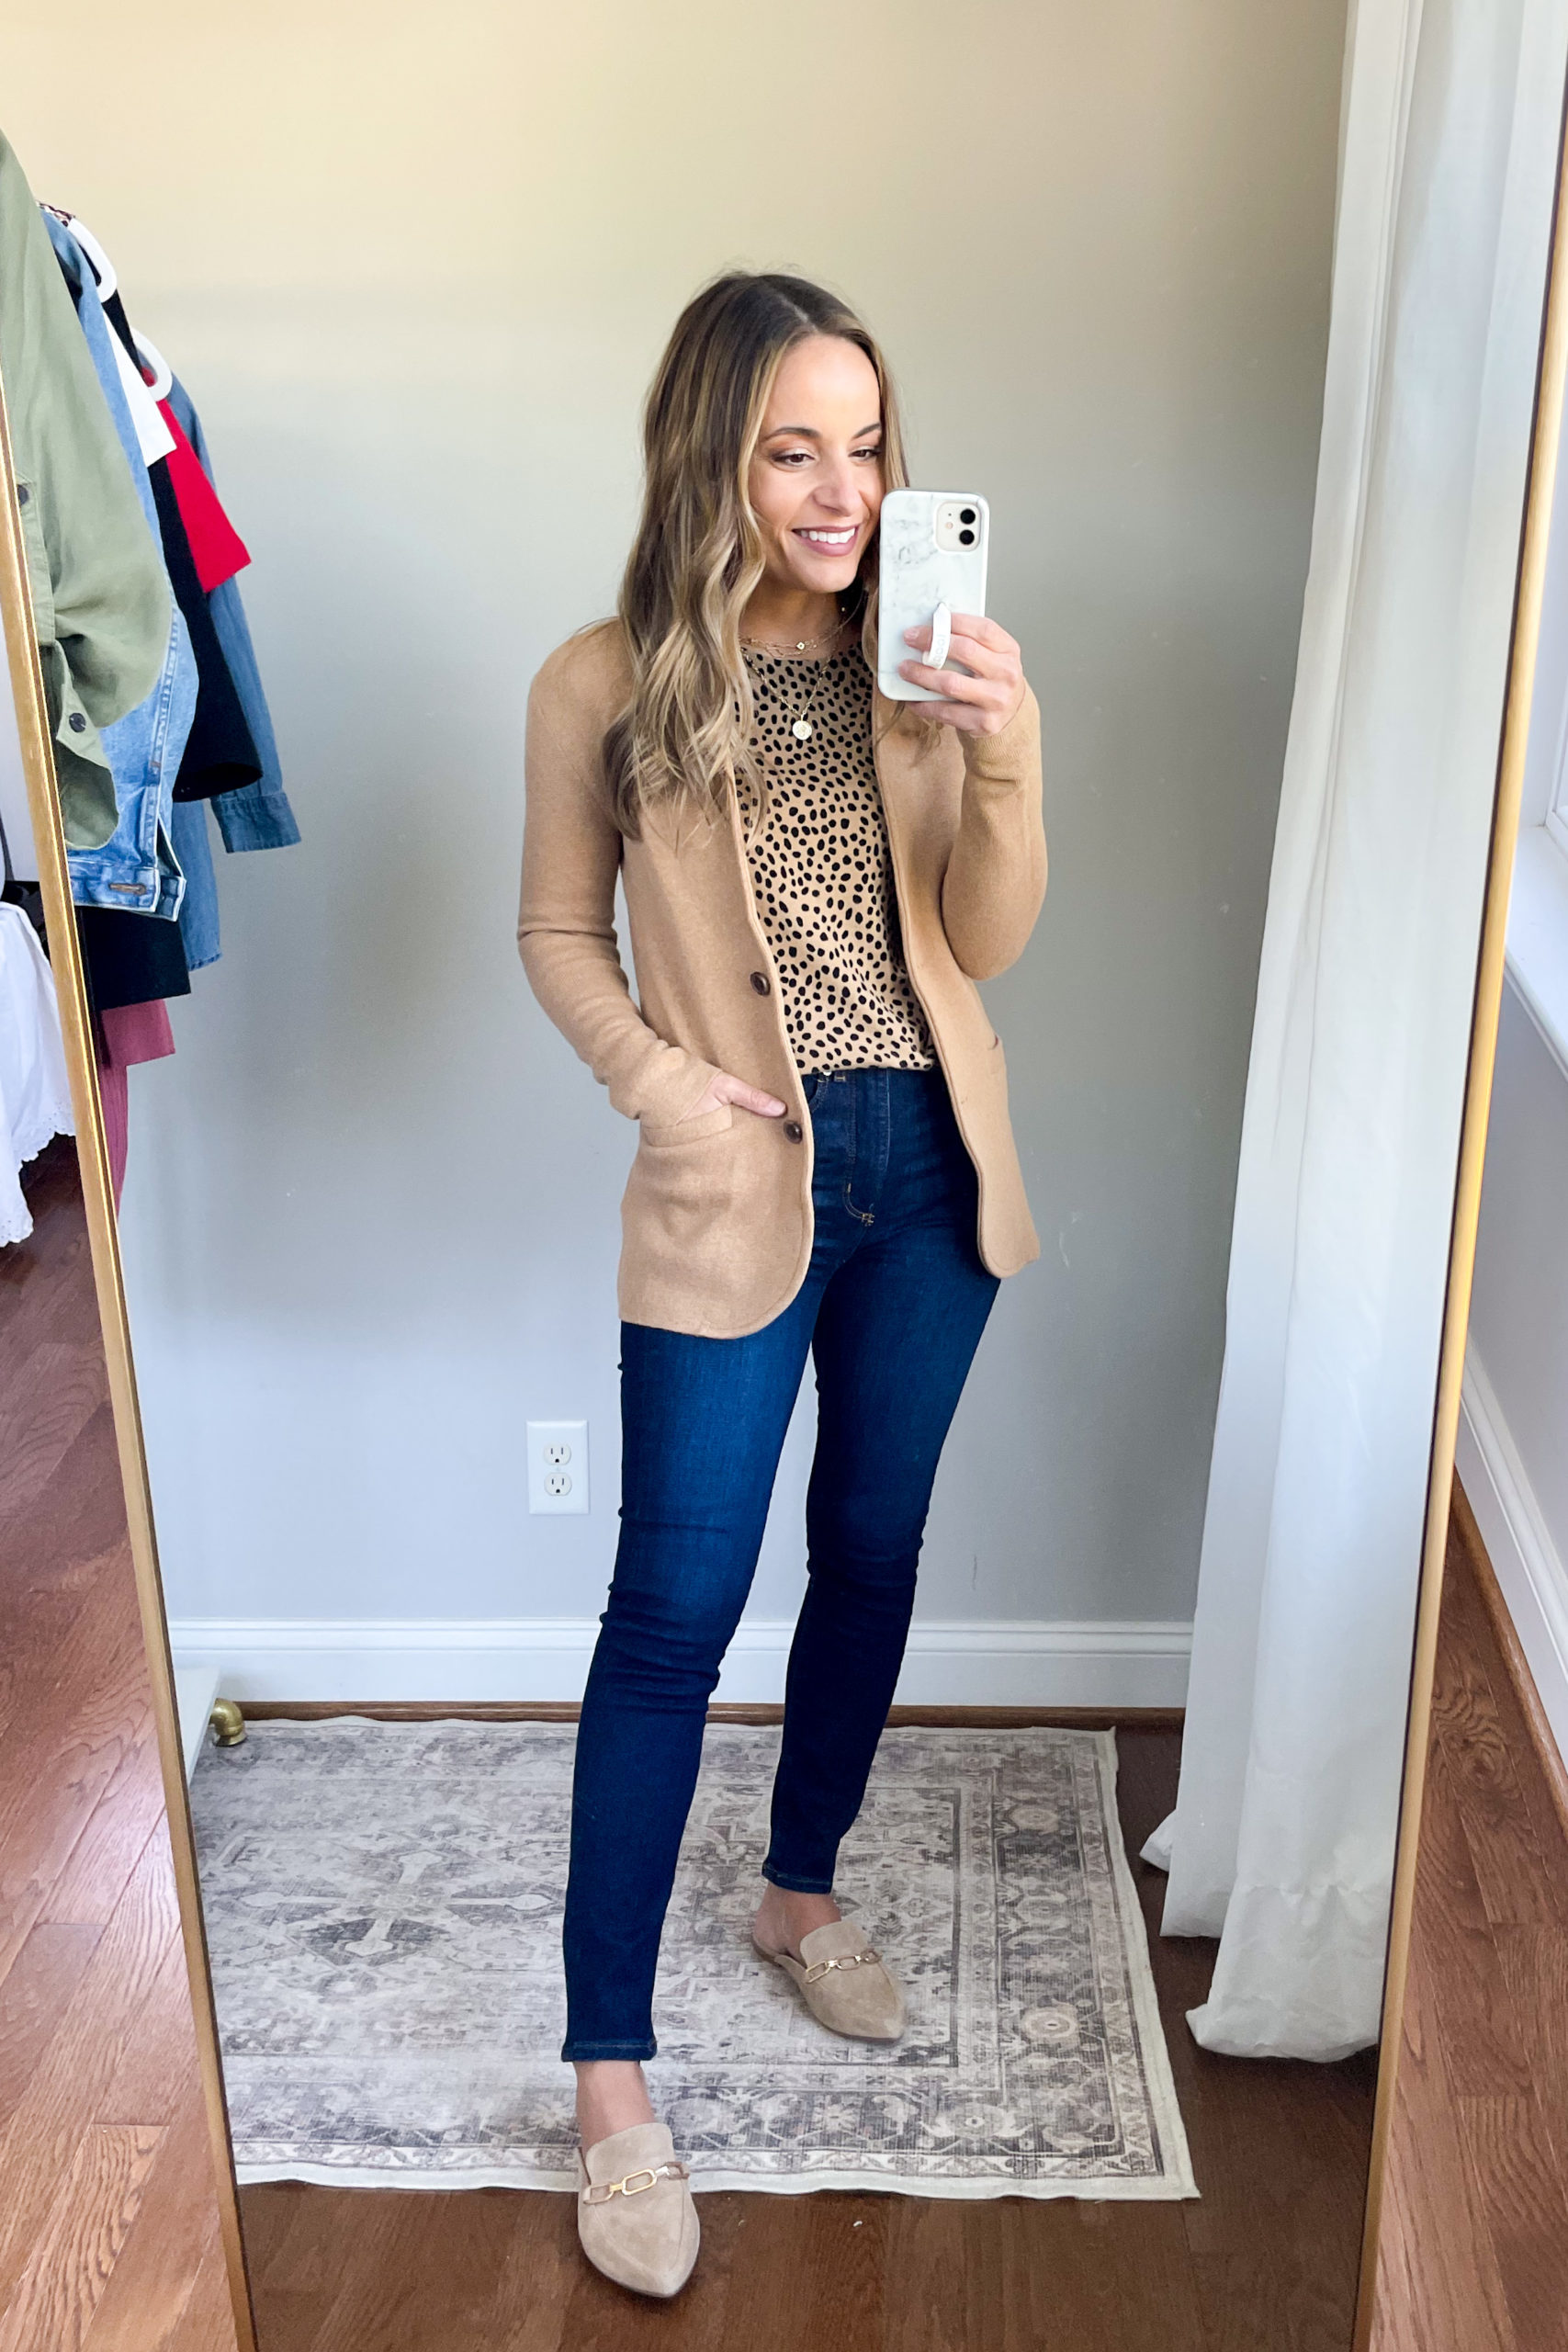 Petite friendly capsule wardrobe for a casual work environment via pumps and push-ups blog | capsule wardrobe | petite fashion | fall outfits | office outfits | zoom outfits